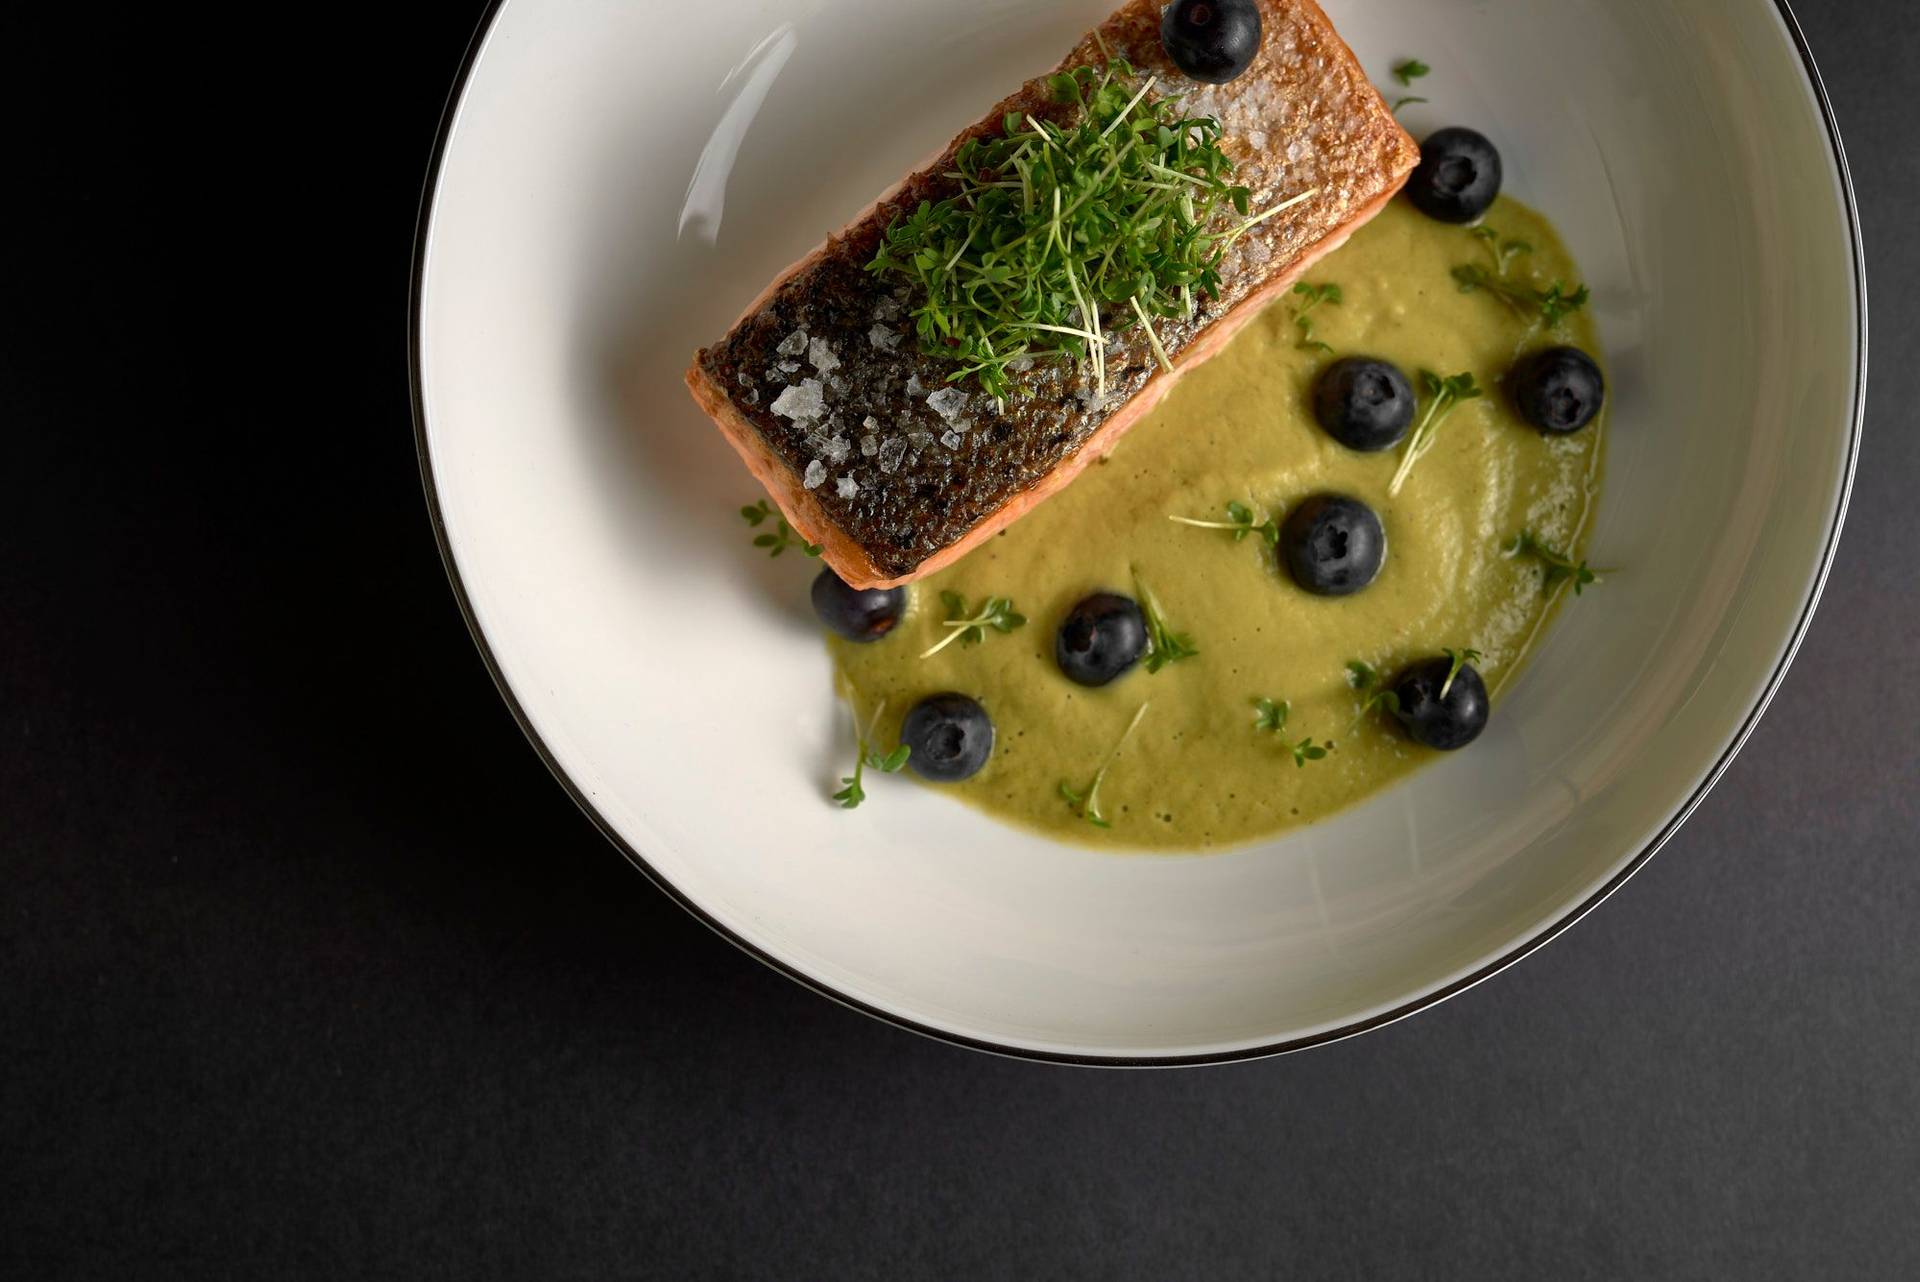 pan fried salmon with asparagus matcha sauce and blueberries on a white plate with black background